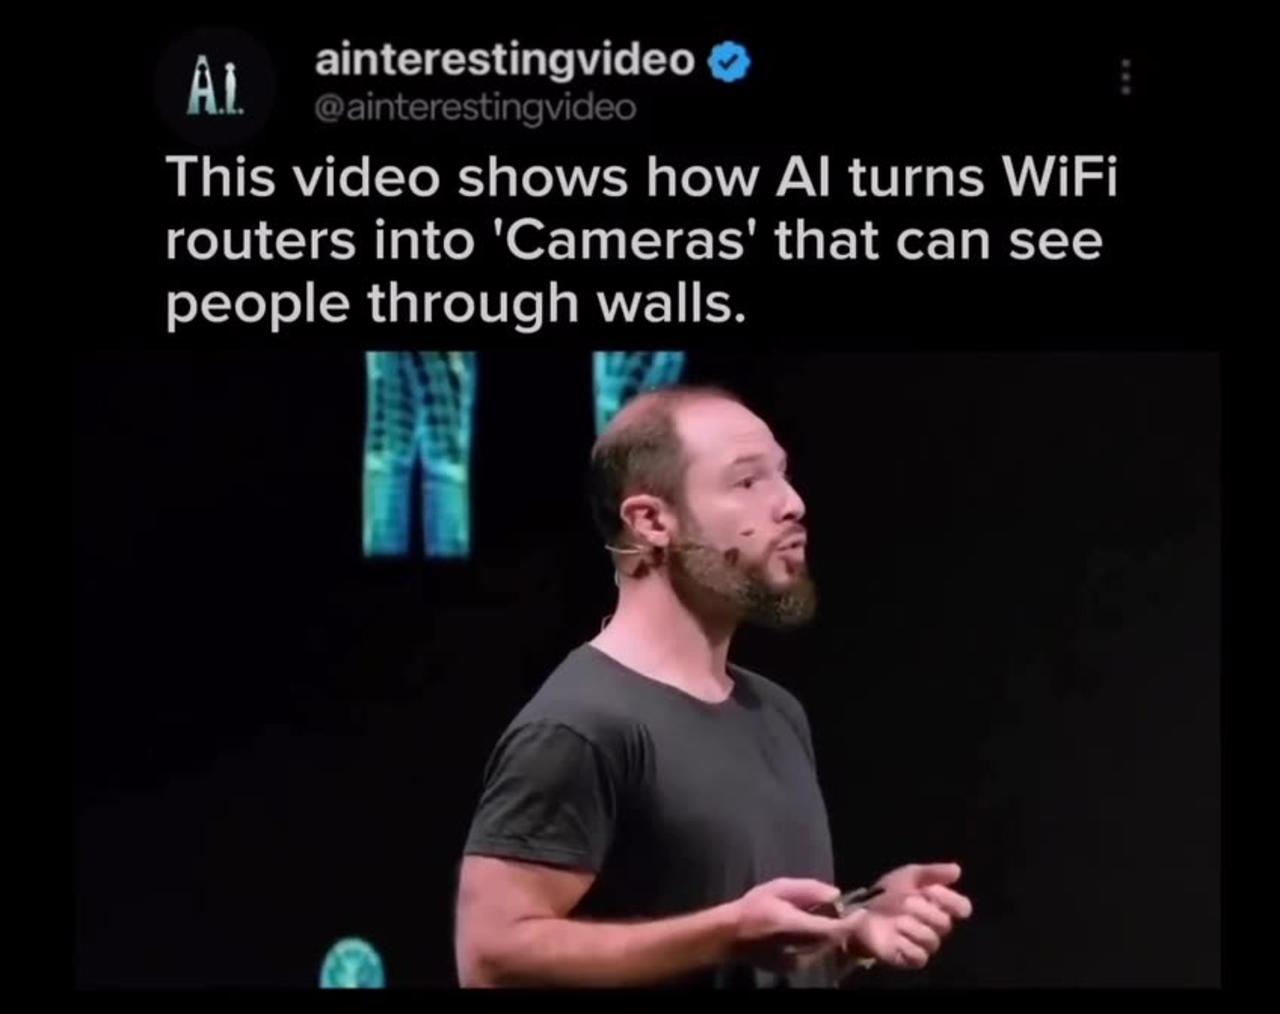 AI TURNS WIFI ROUTERS INTO CAMERA THAT CAN SEE PEOPLE THROUGH WALLS